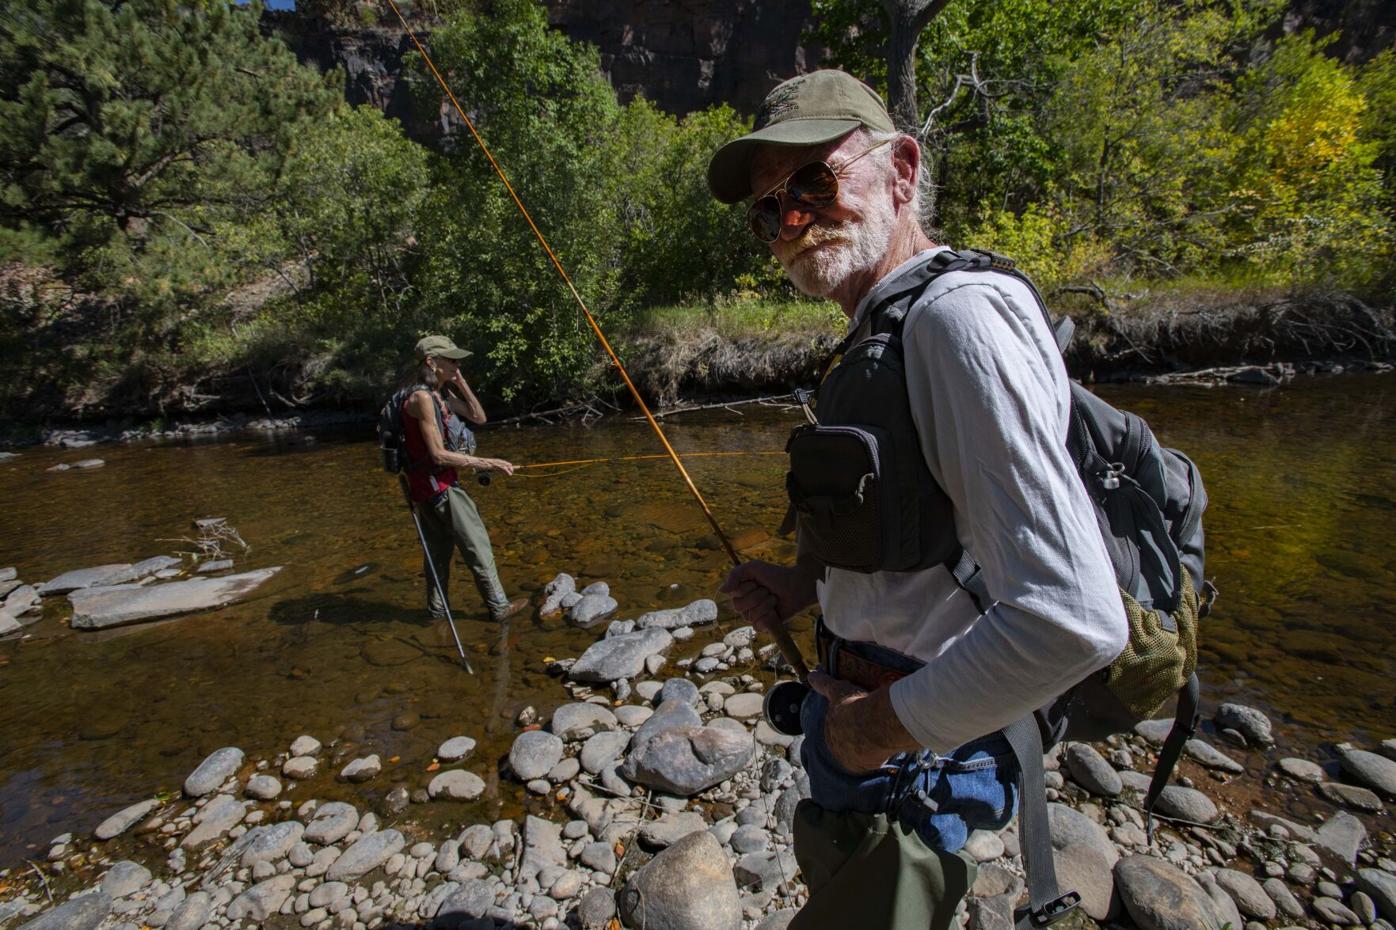 By a master's hands in the Colorado mountains, the bamboo fly rod